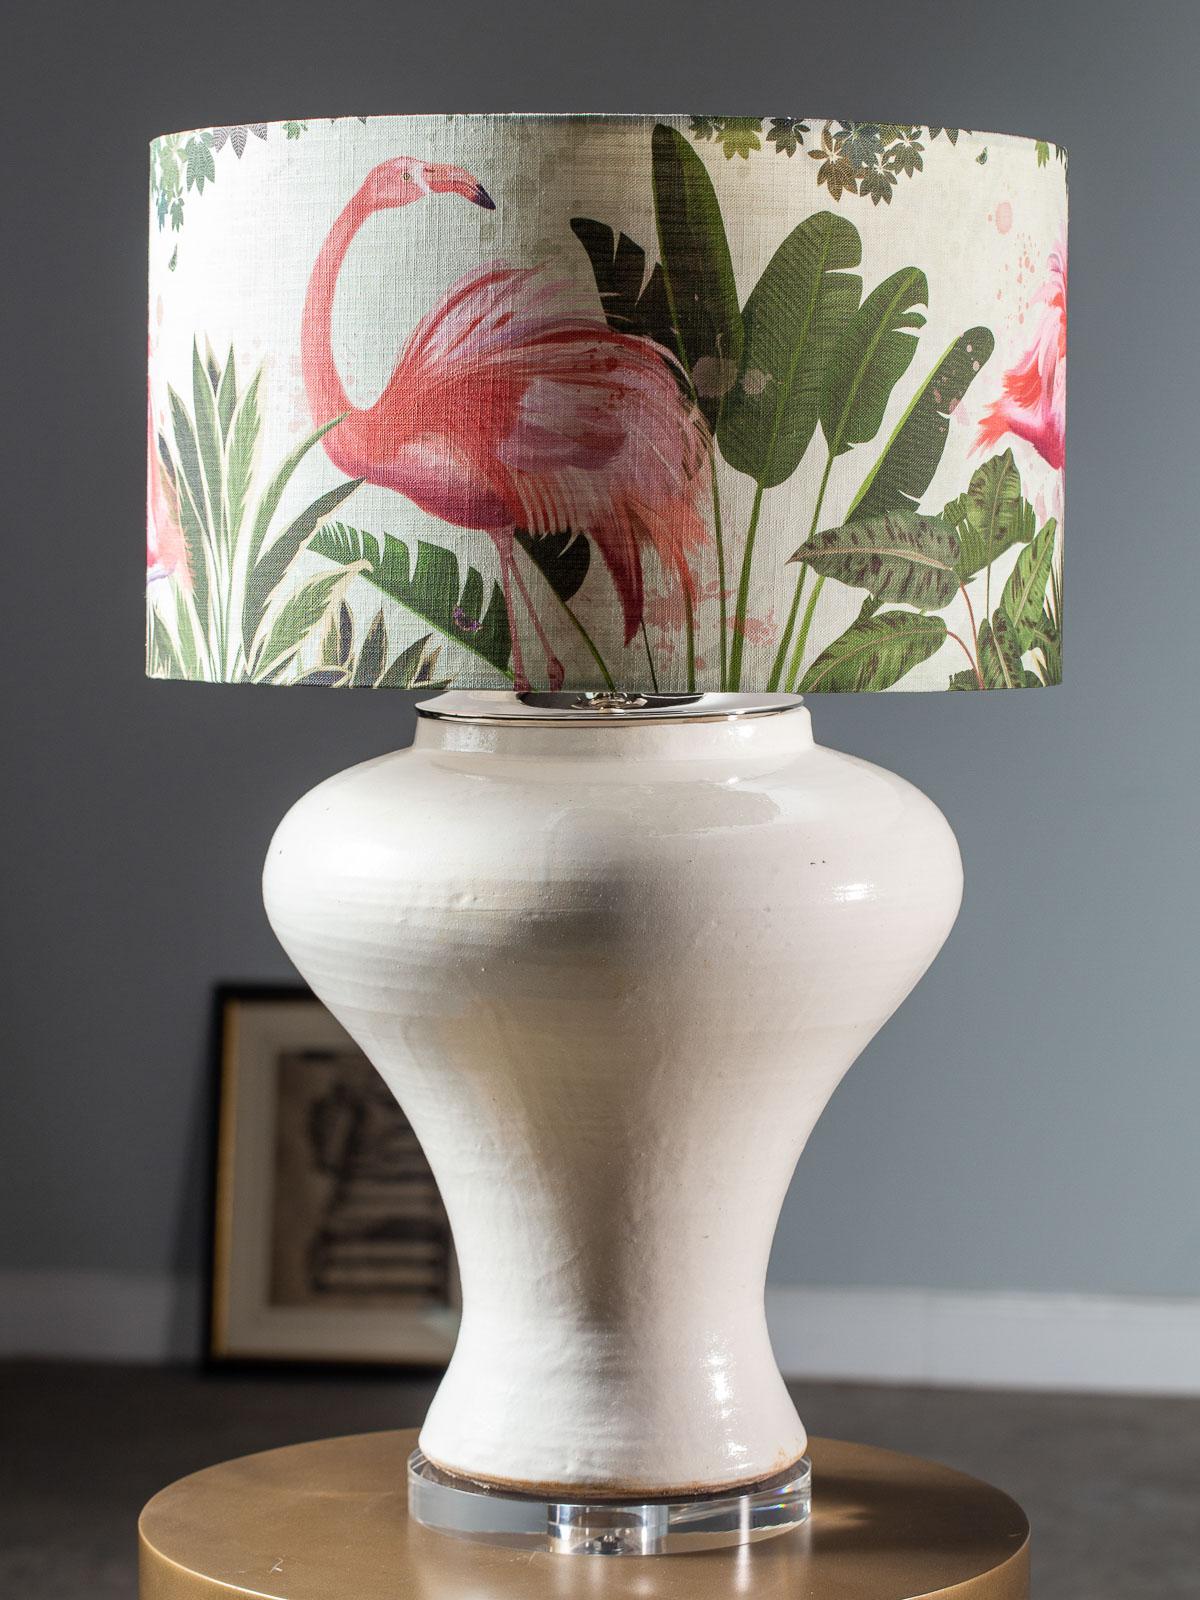 A hand made modern glazed ceramic vase vessel with a wide neck now transformed into a custom lamp. Fitted with nickel silver hardware and mounted on a circular Lucite base this custom lamp takes a standard base bulb. Now topped with a linen shade